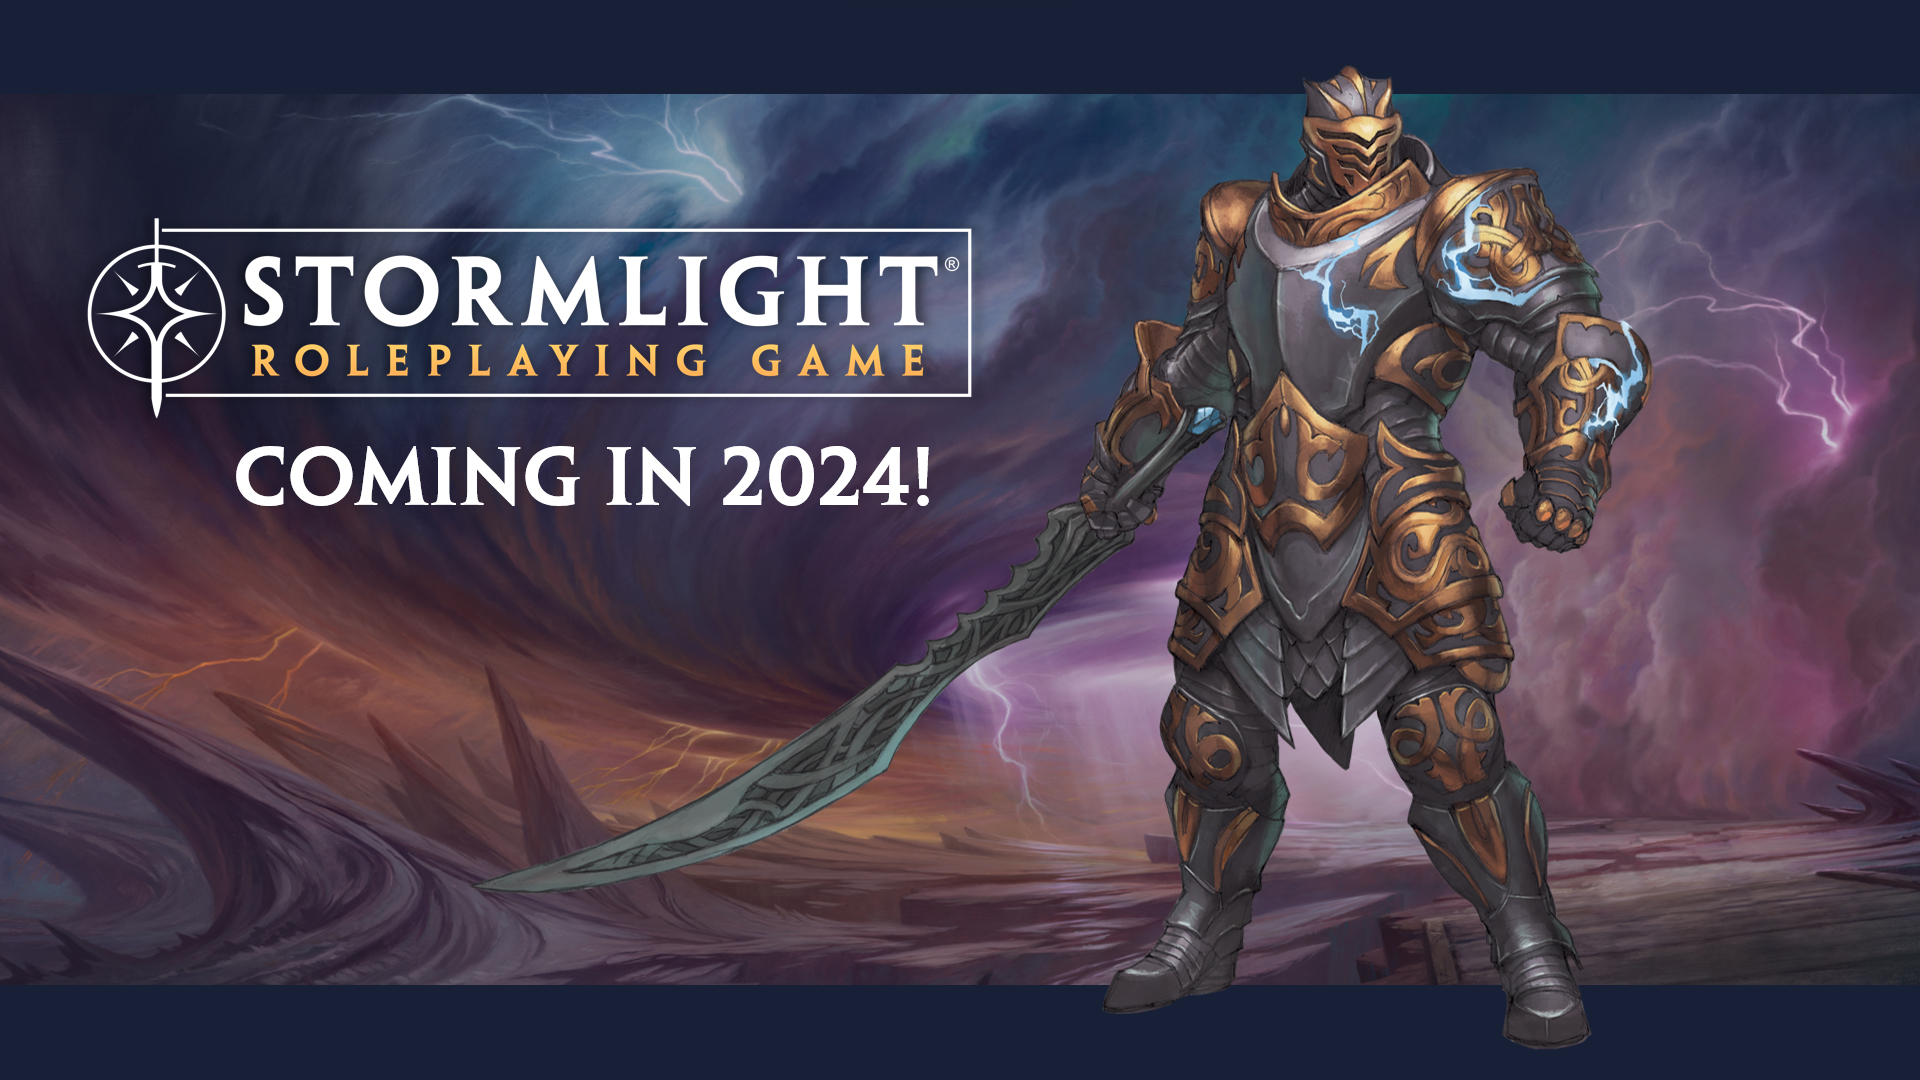 Stormlight Roleplaying Game - Coming in 2024